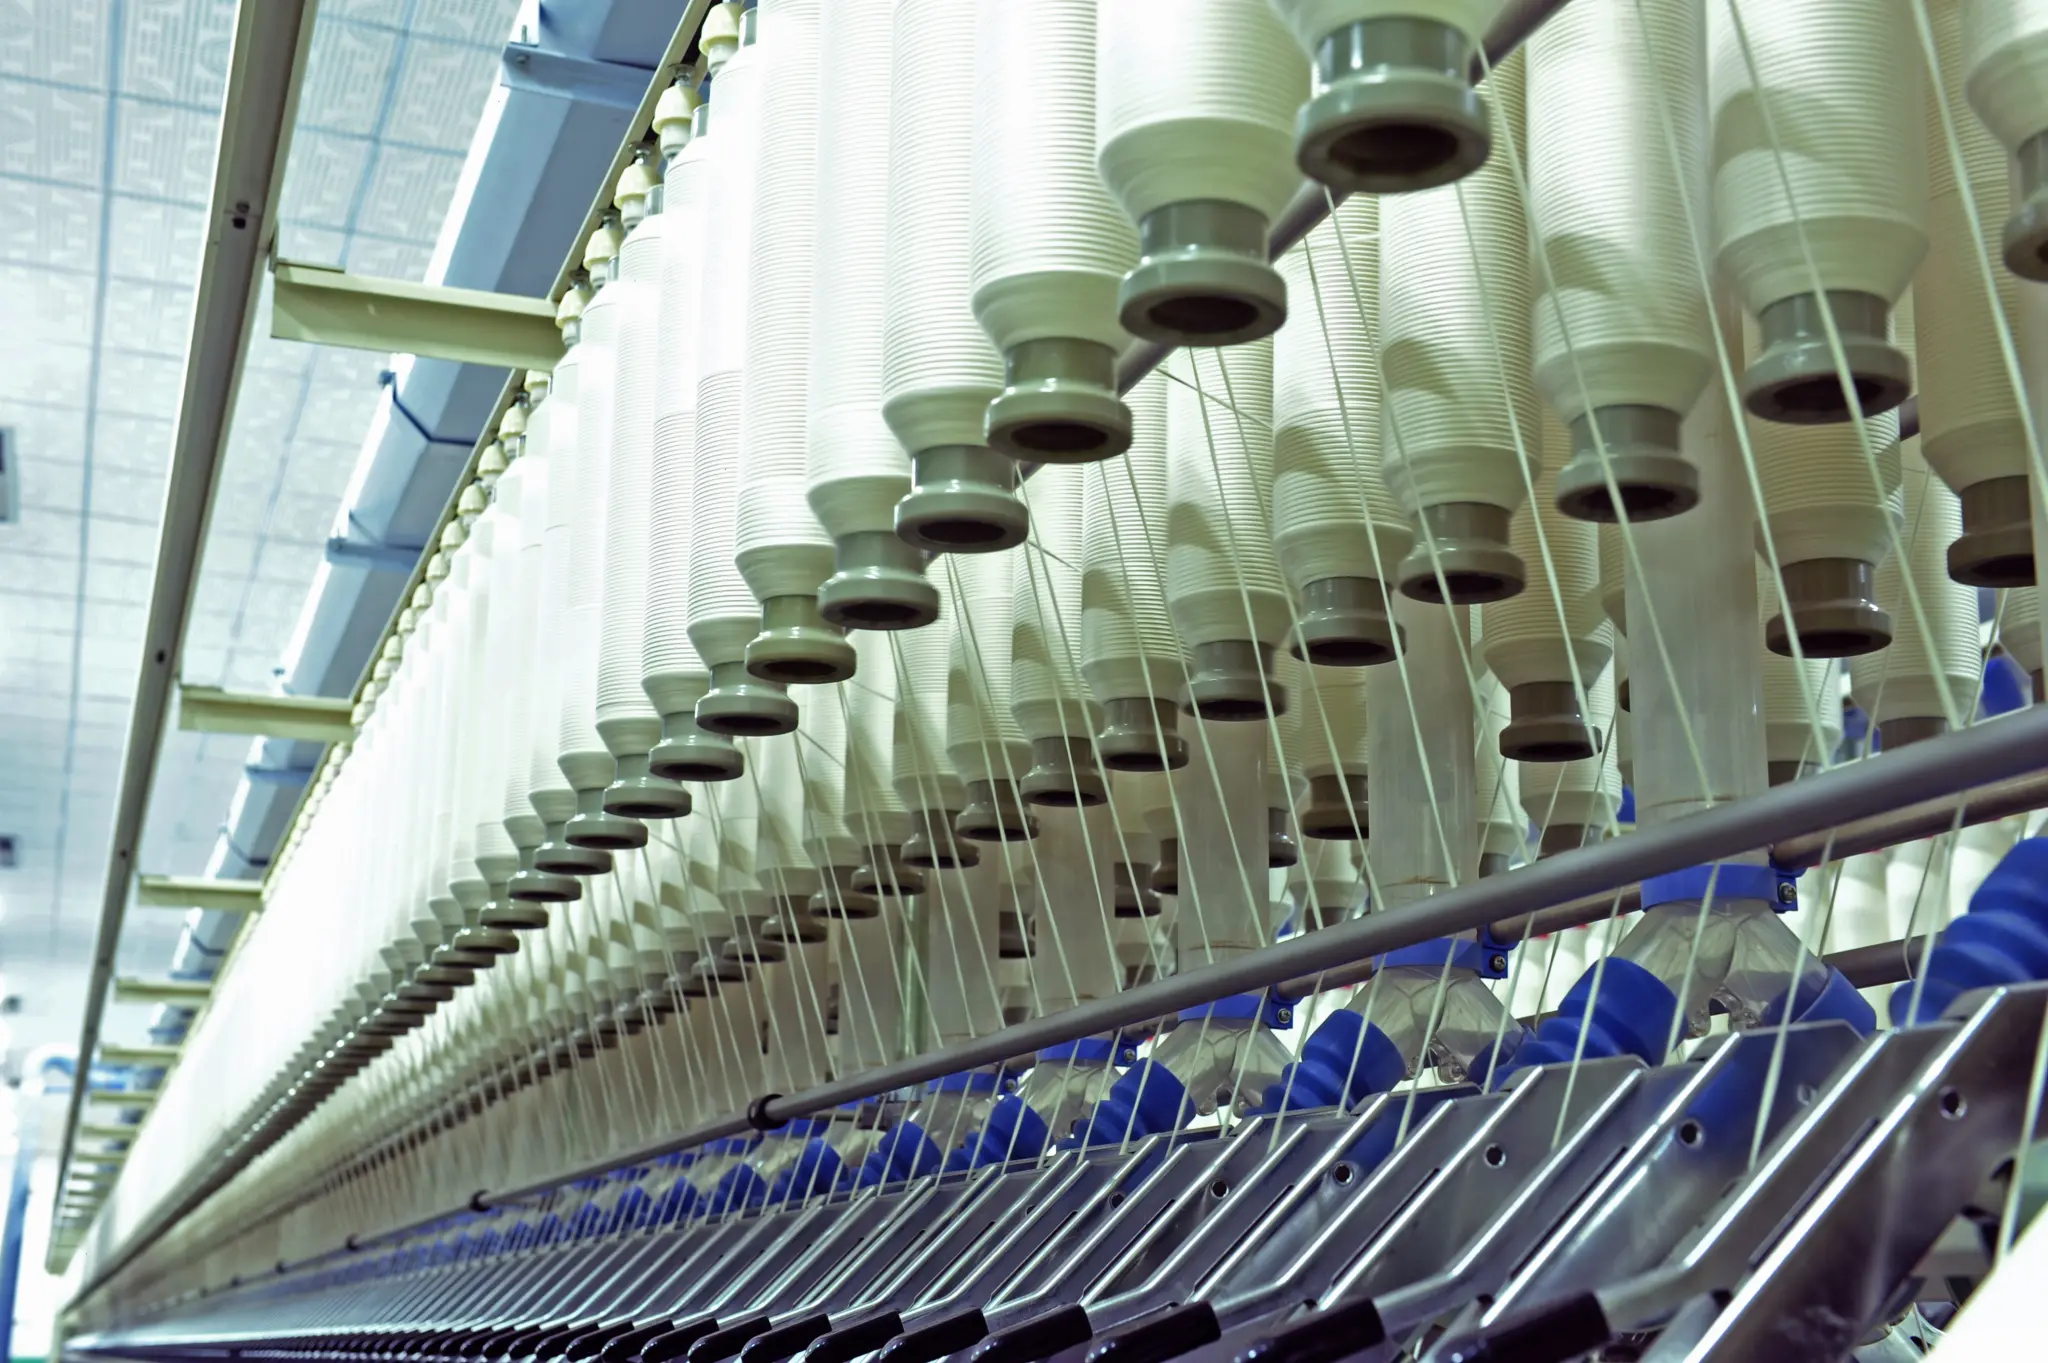 Stitching It All Together: Air Compressors in the Textile Manufacturing Sector